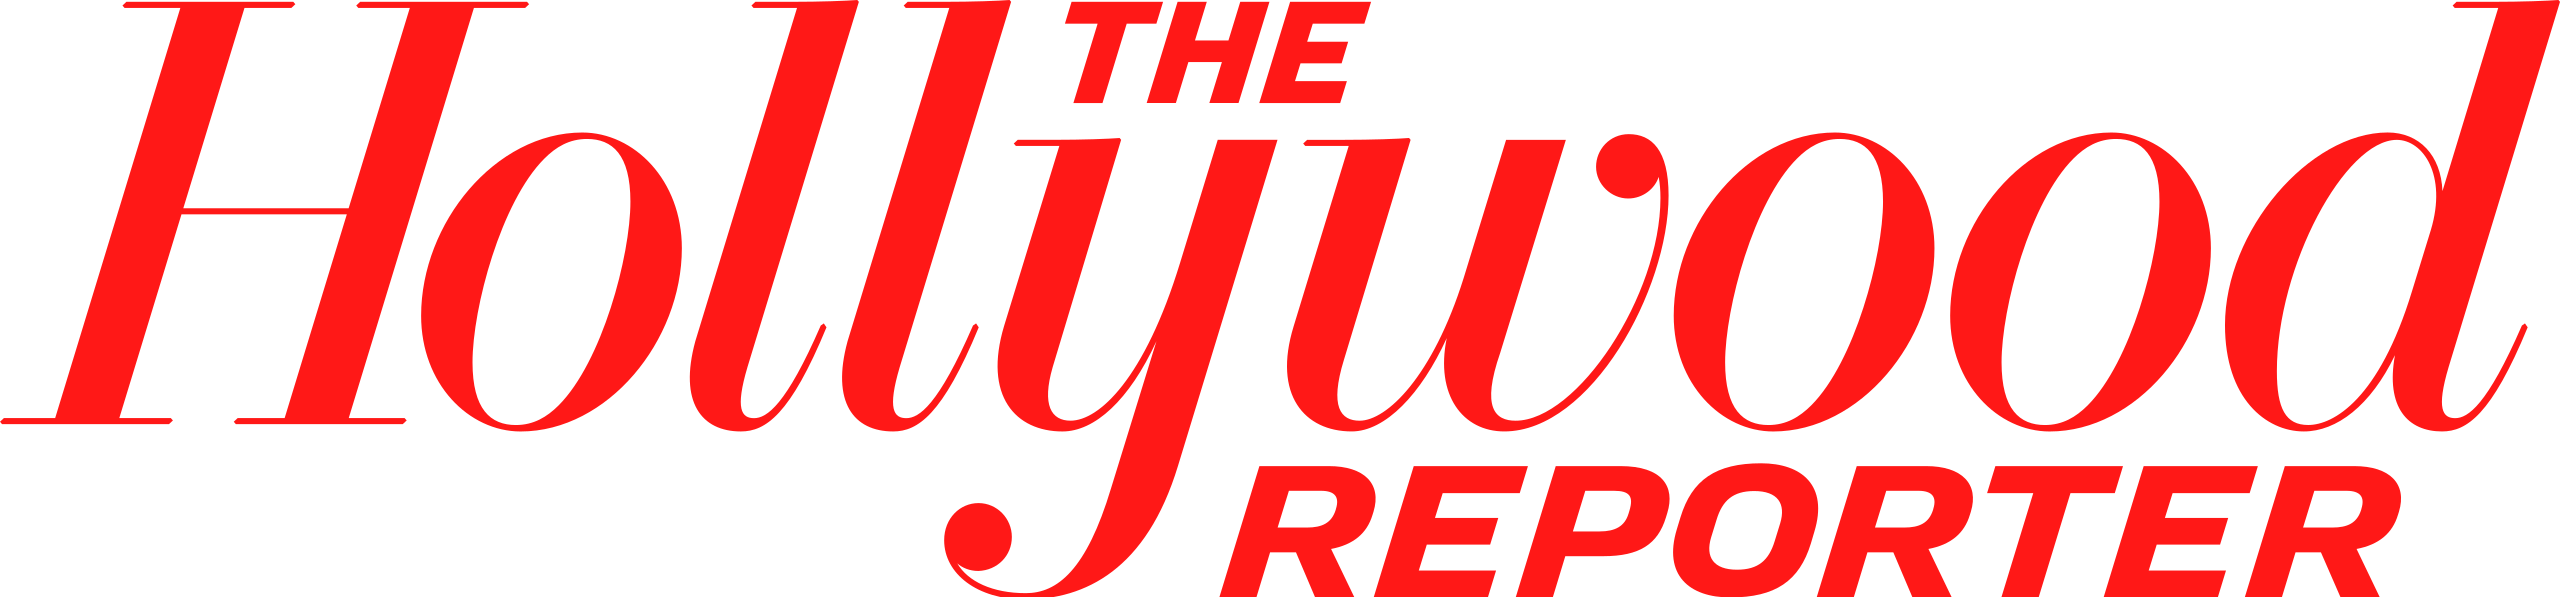 The Hollywood Reporter logo.svg